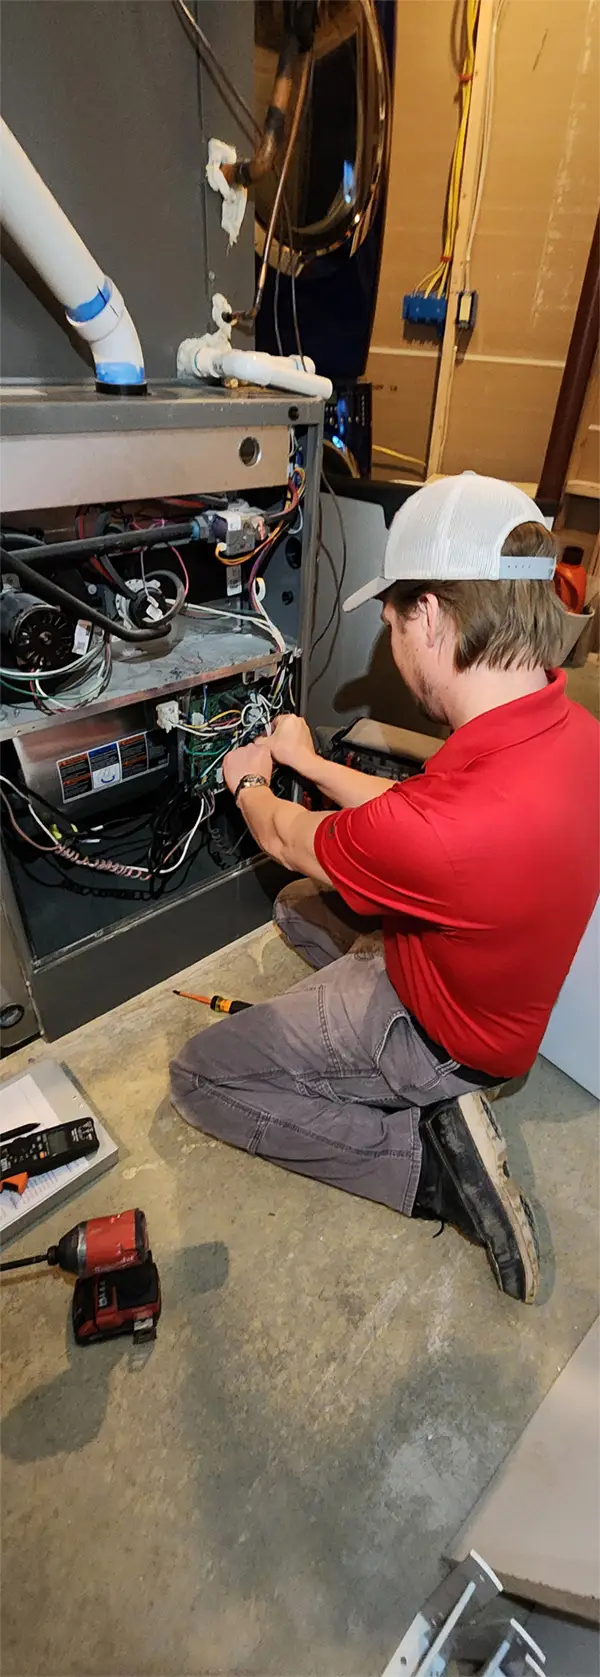 Bison Home Service technician fixing Furnace Issues